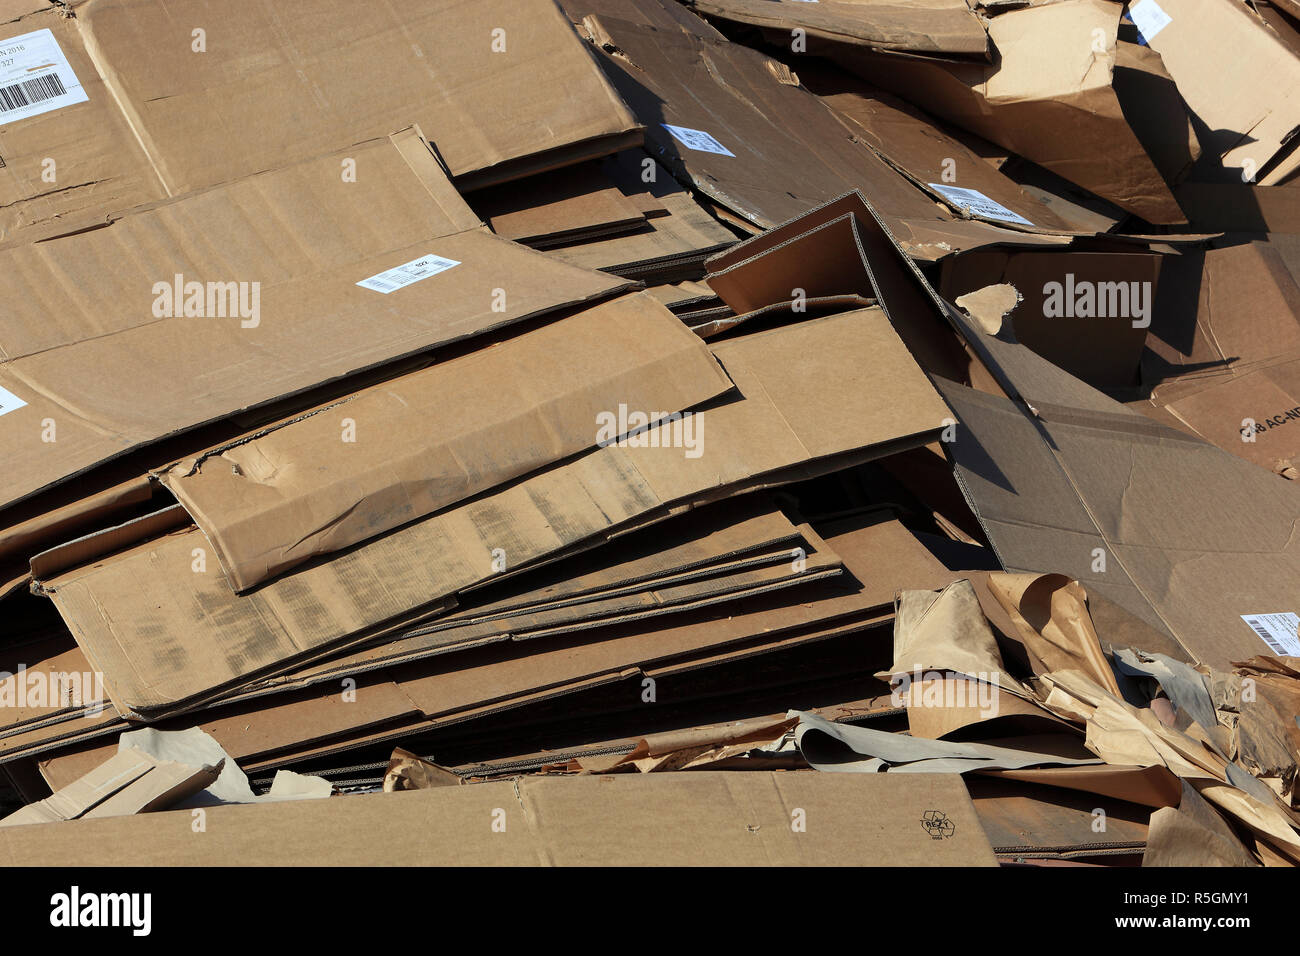 Old paper, cardboard boxes, on a pile for recycling in a recycling plant, Germany Stock Photo